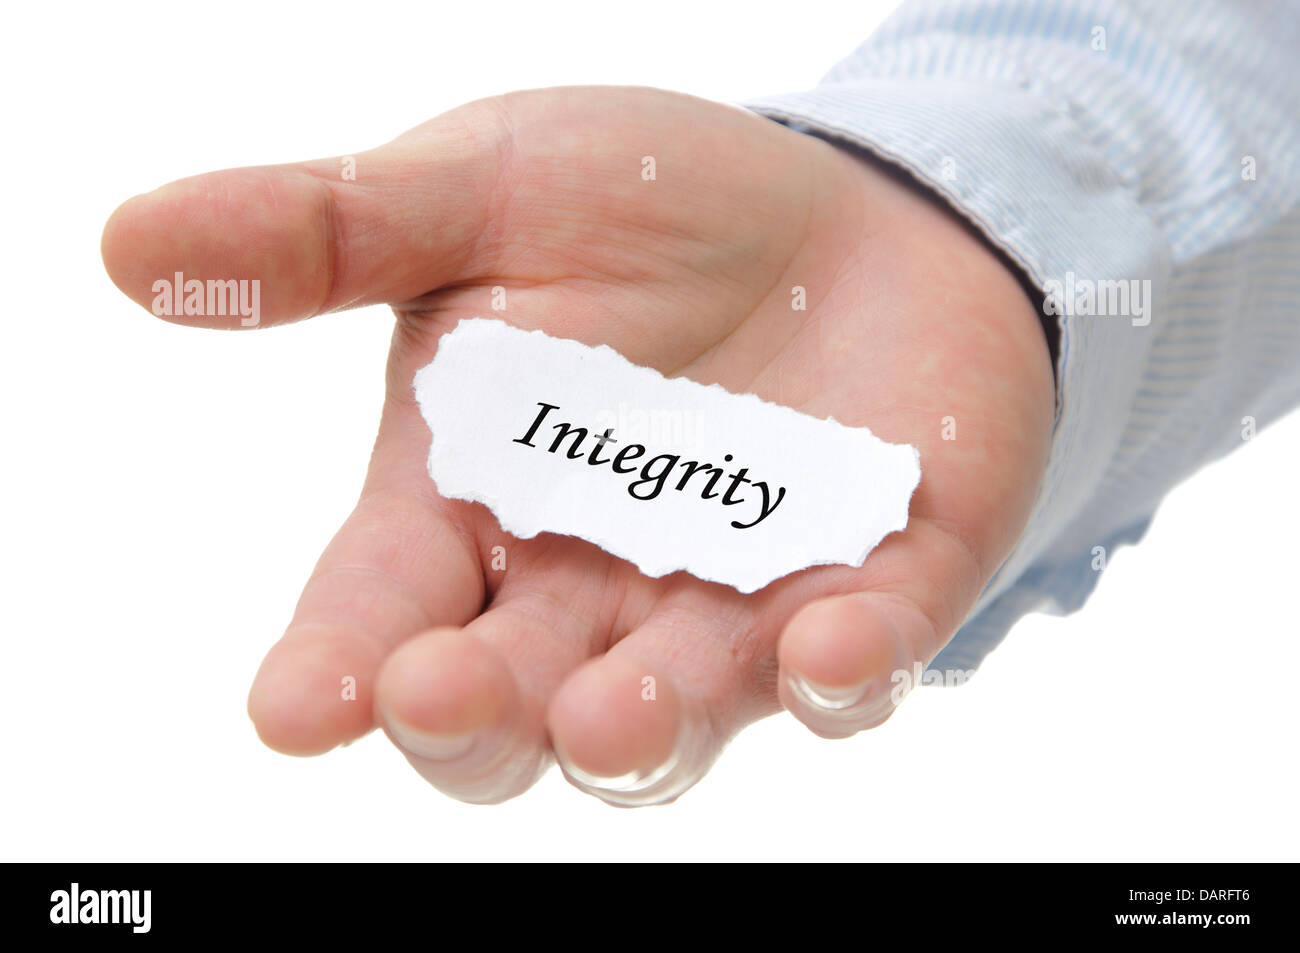 Integrity - Note Series Stock Photo